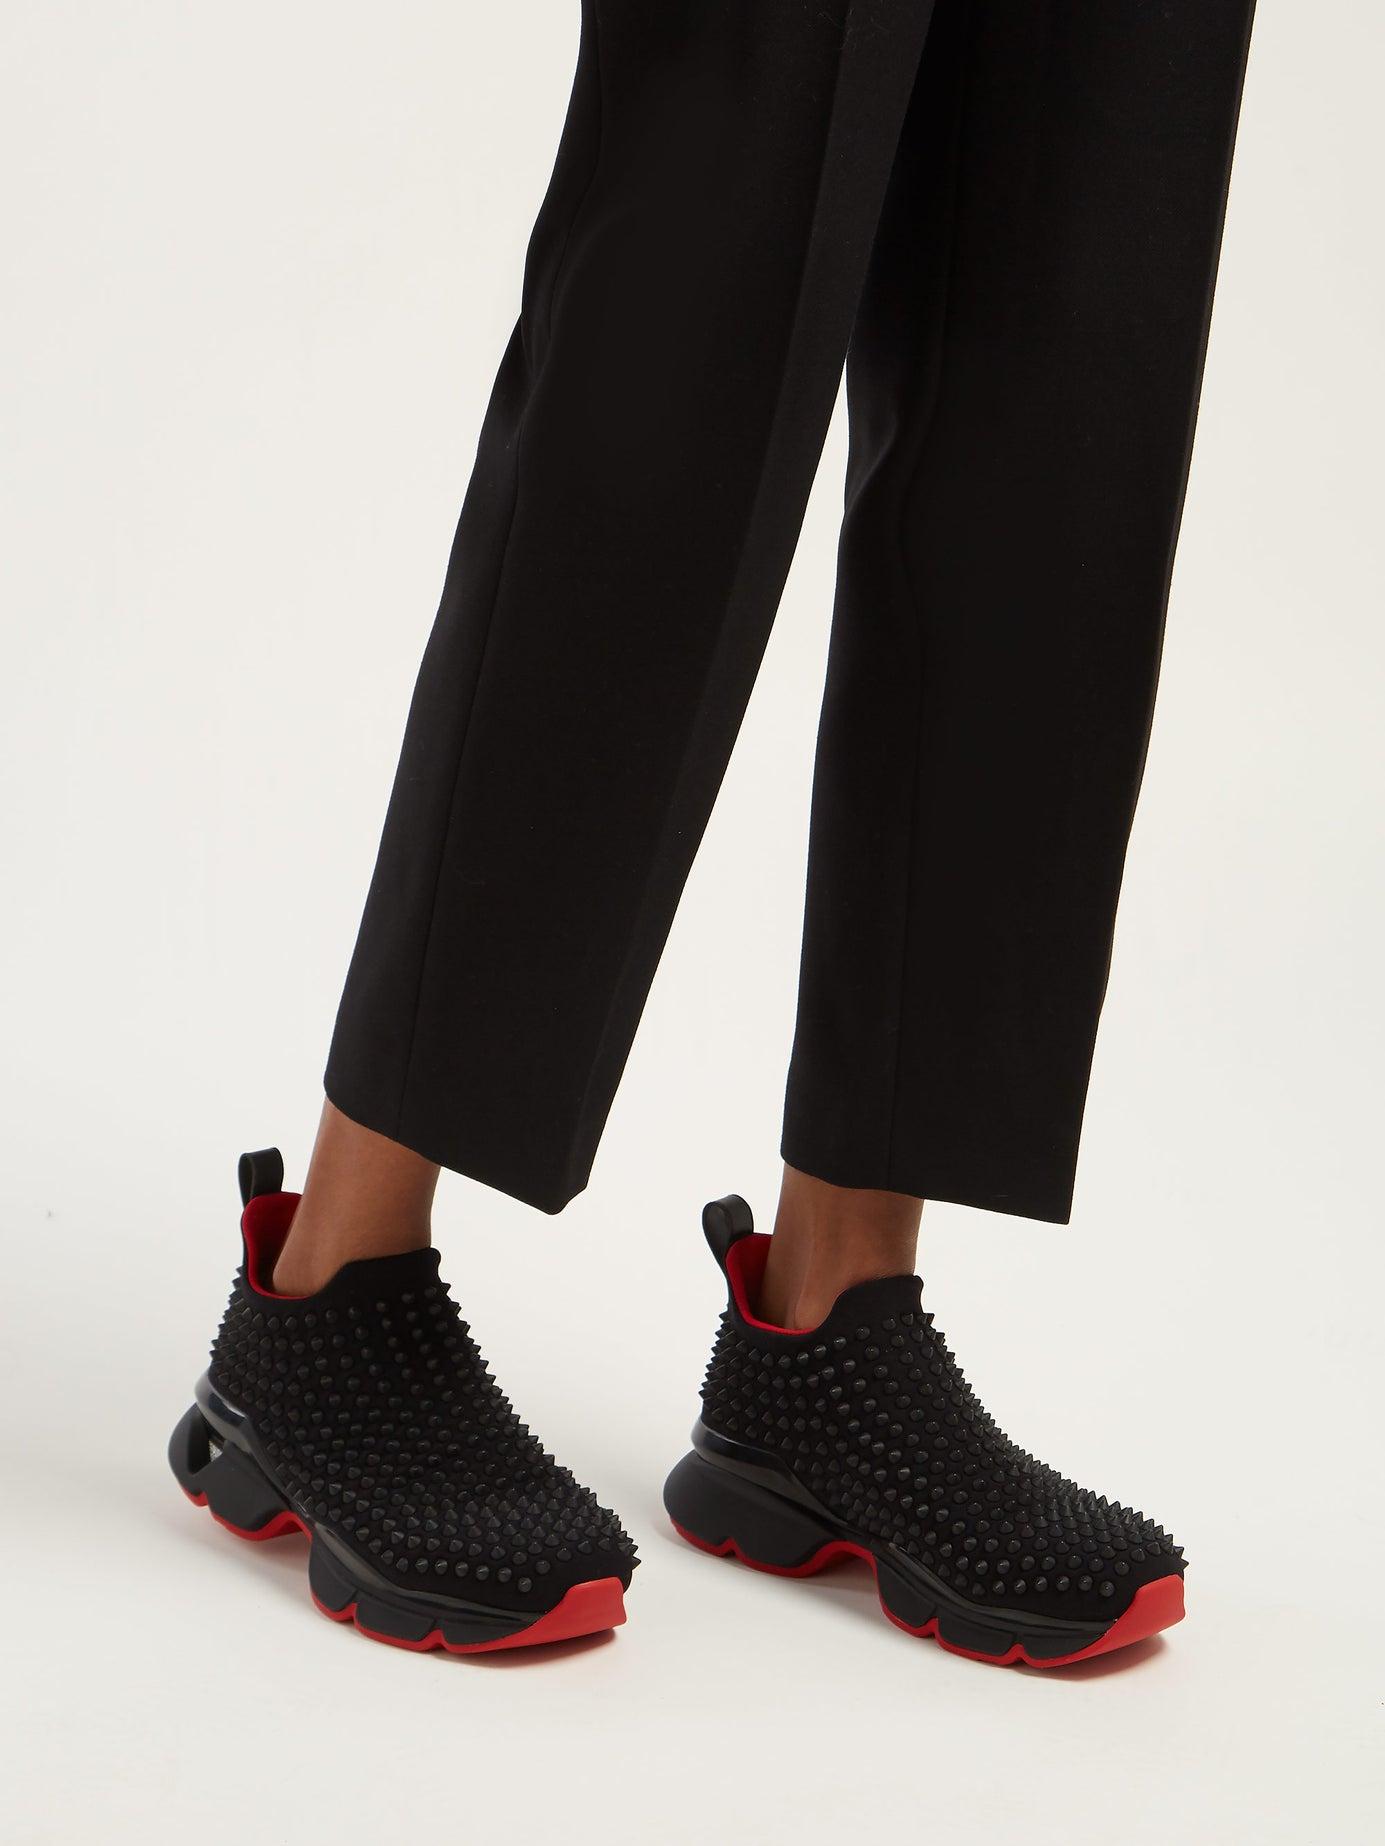 spike sock donna red sole sneakers